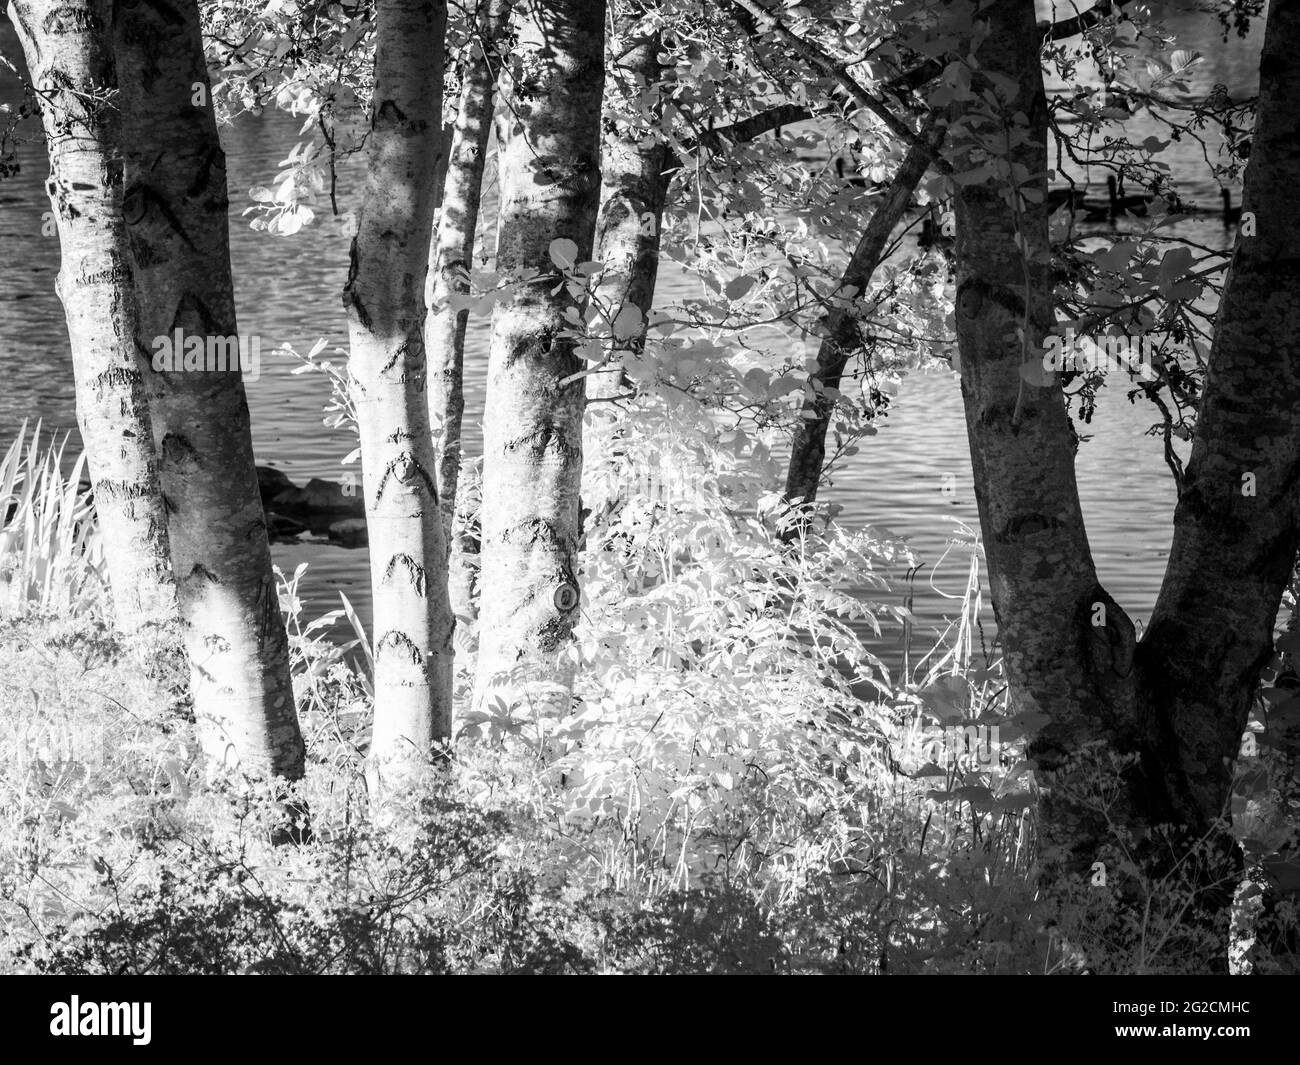 A sunny summer evening at a small lake in Swindon, Wiltshire taken in infrared. Stock Photo